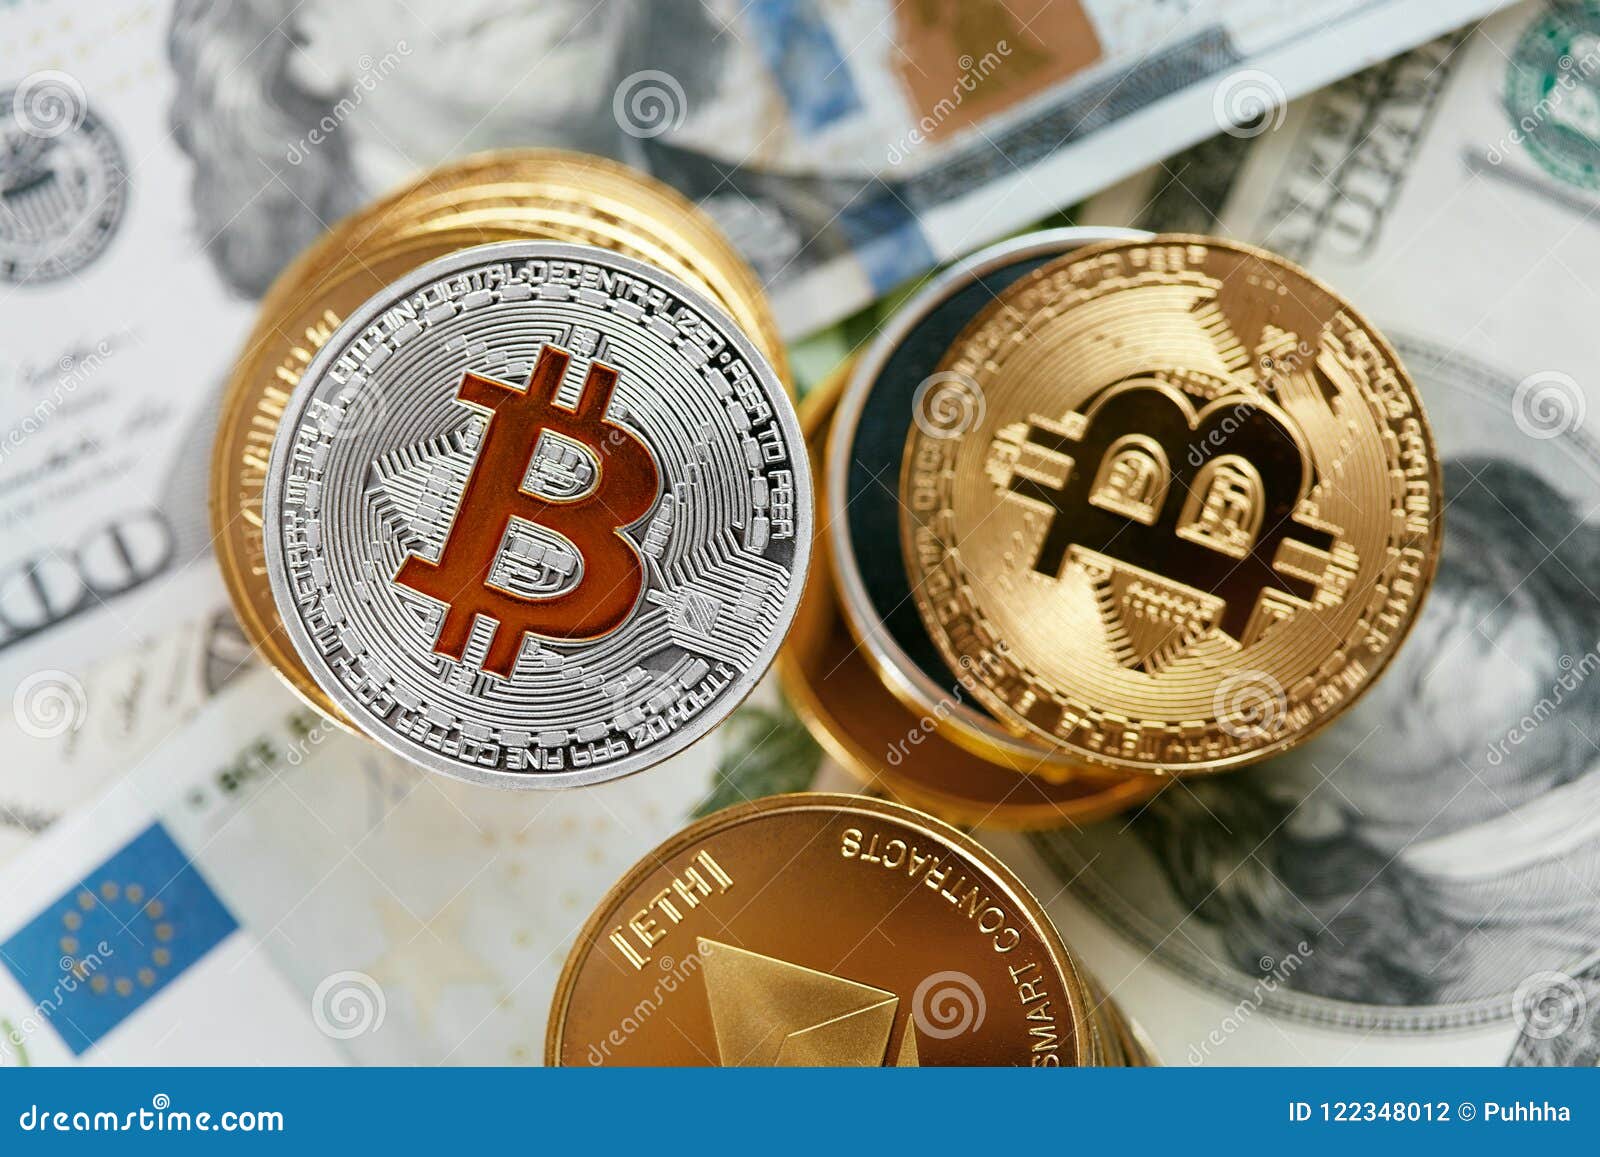 exchange coin for cash